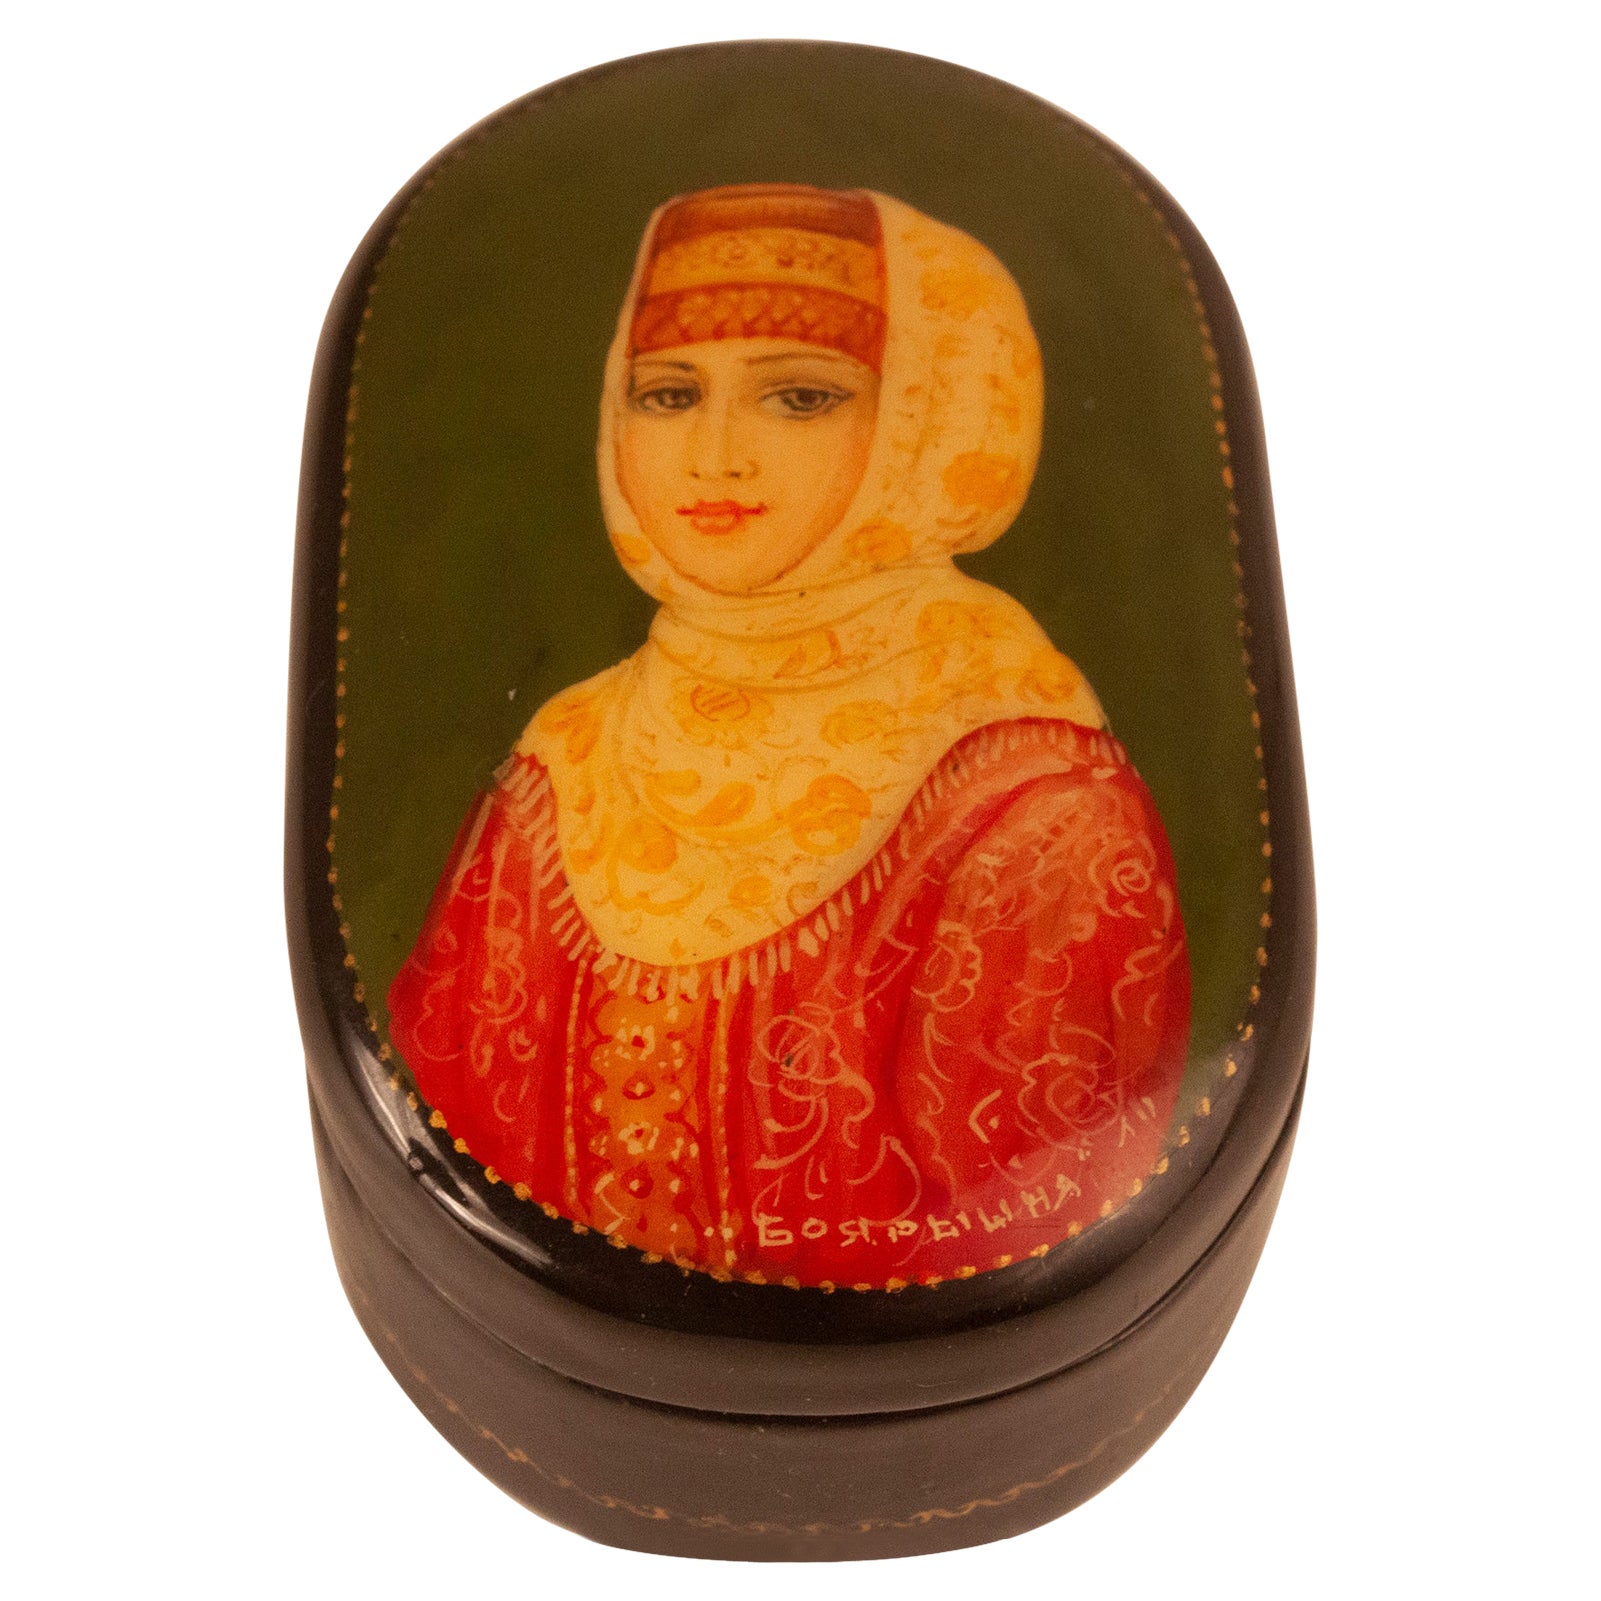 What are Russian lacquer boxes called?